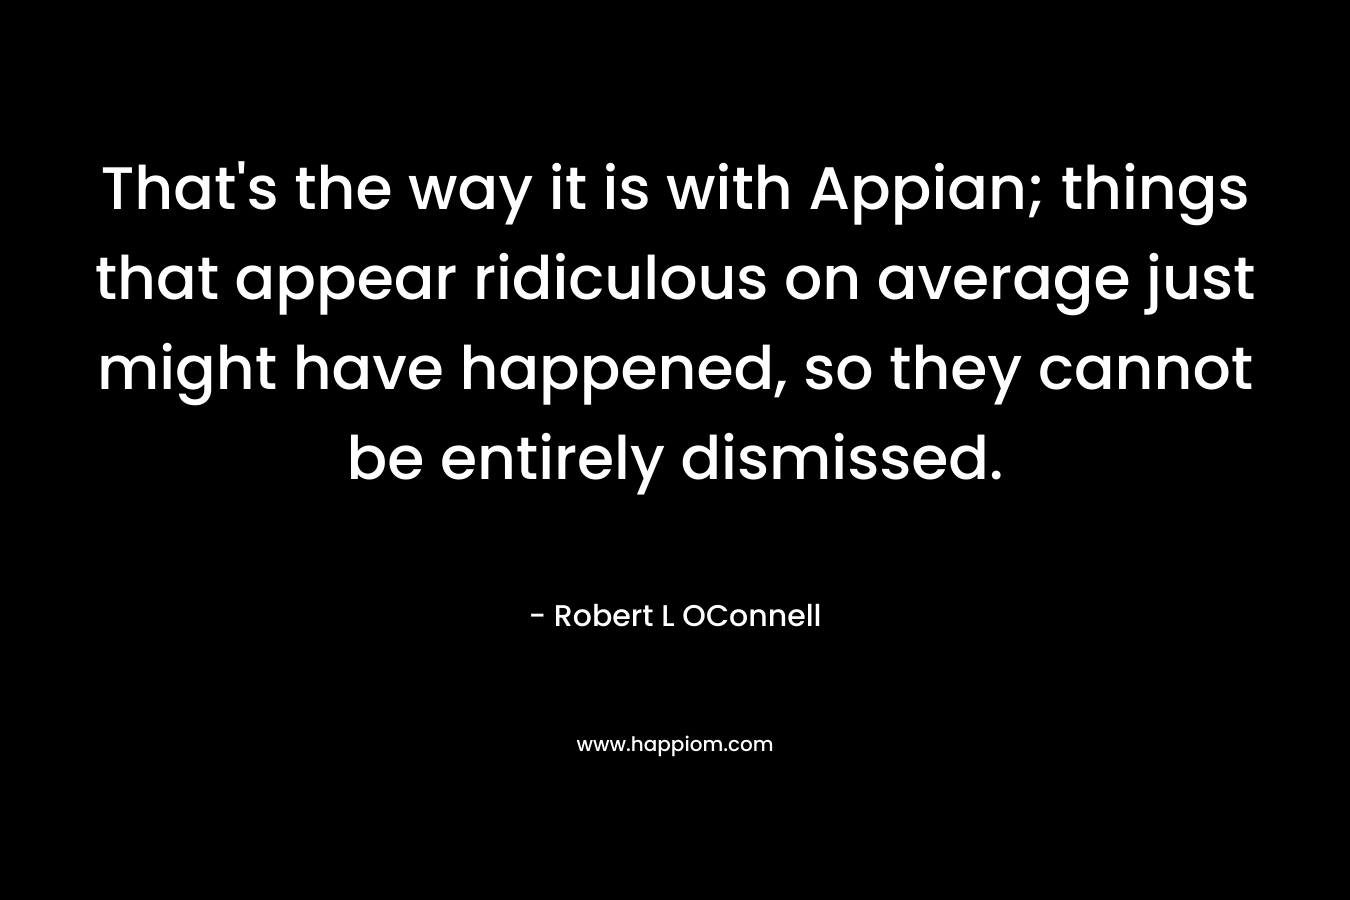 That’s the way it is with Appian; things that appear ridiculous on average just might have happened, so they cannot be entirely dismissed. – Robert L OConnell